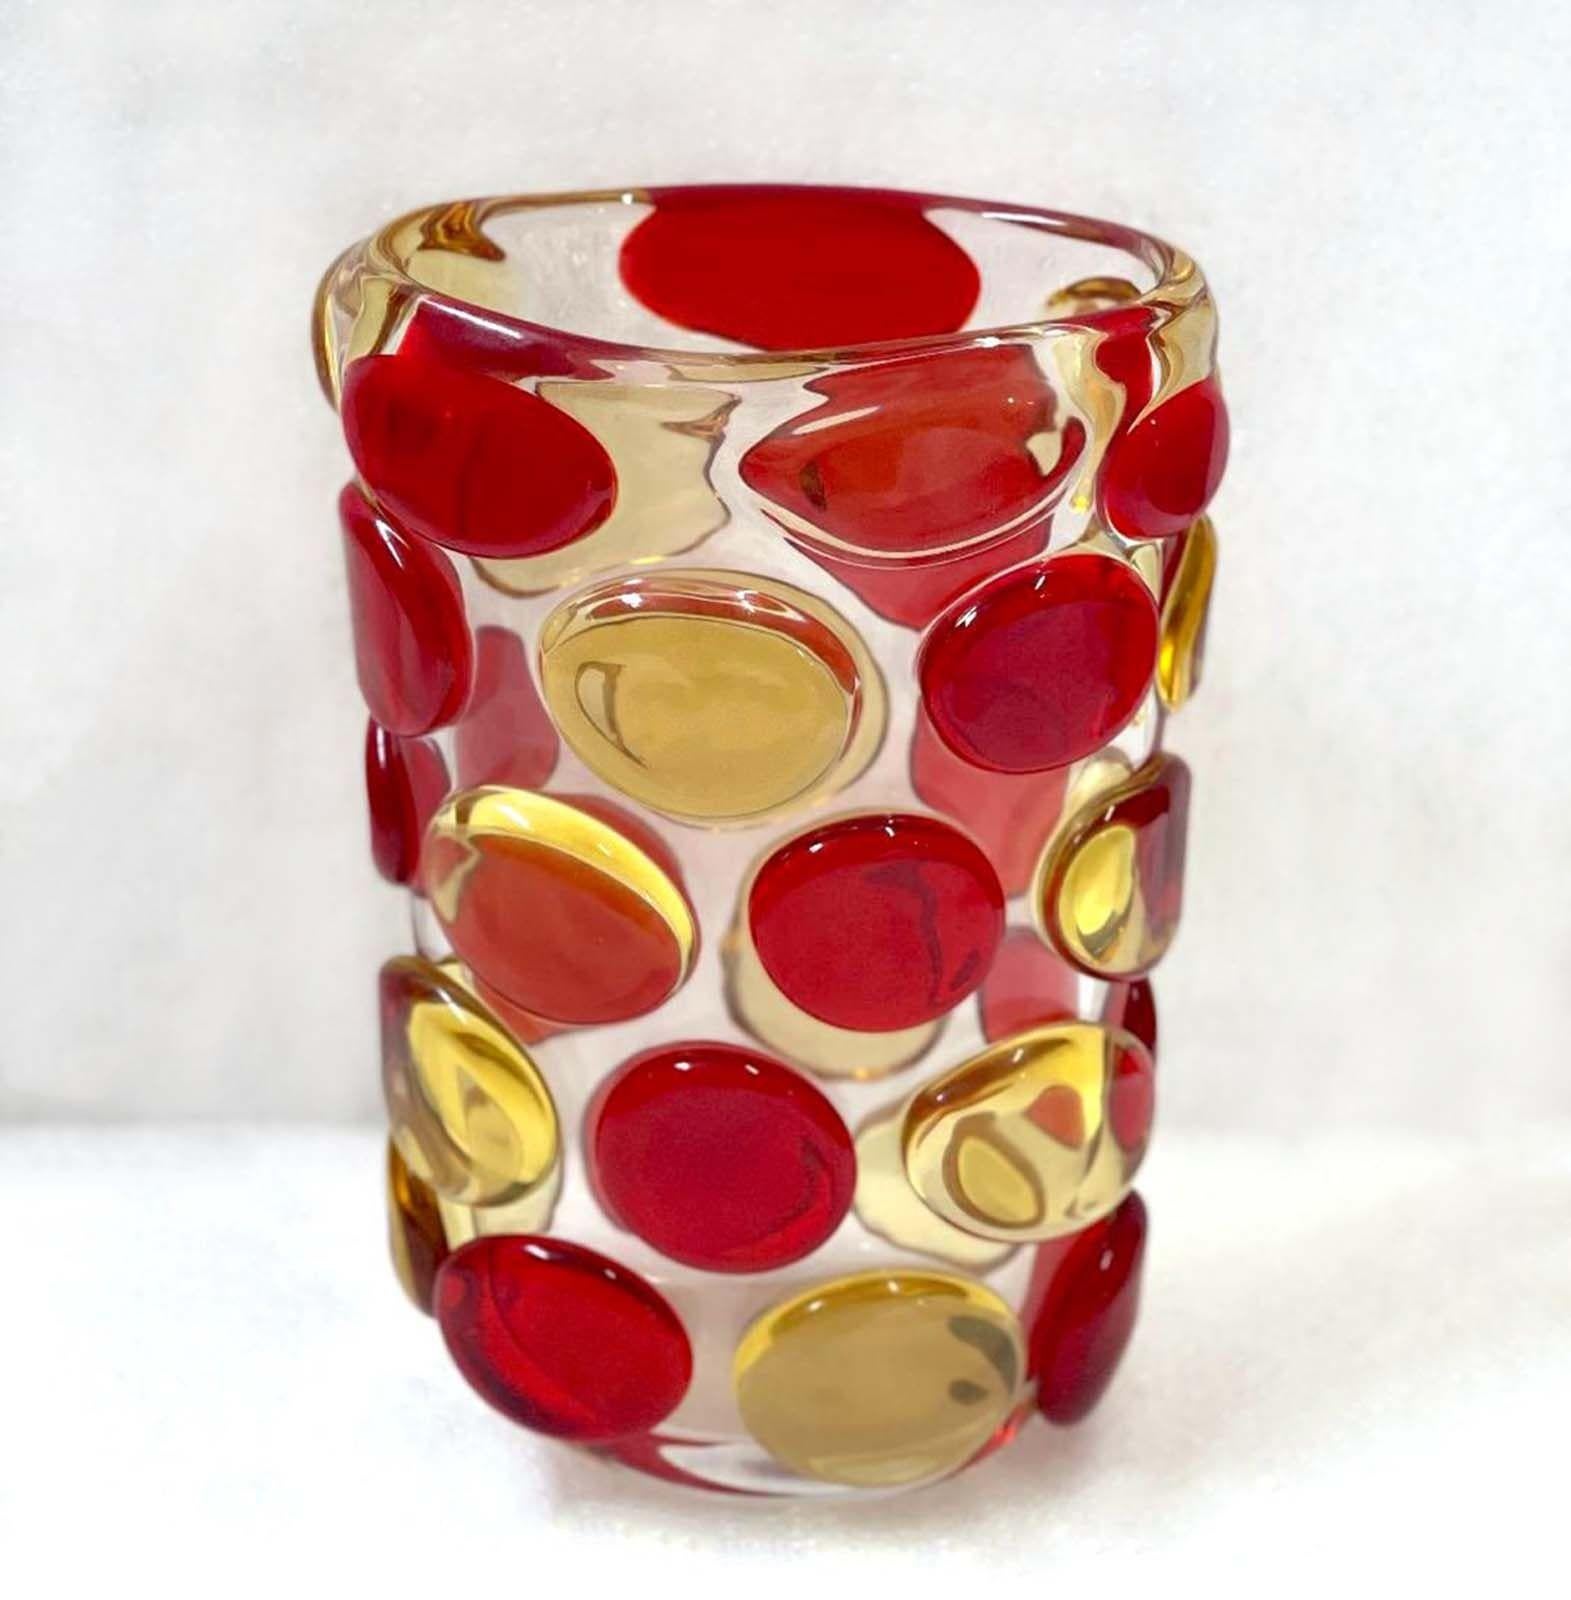 Beautiful vase with clear Murano glass body and decorative red and yellow Murano glass buttons by Camozzo and signed on the base. Made in Italy in the 1970s Measures: height: 13.5 inches / width: 9 inches / depth: 5.5 inches.